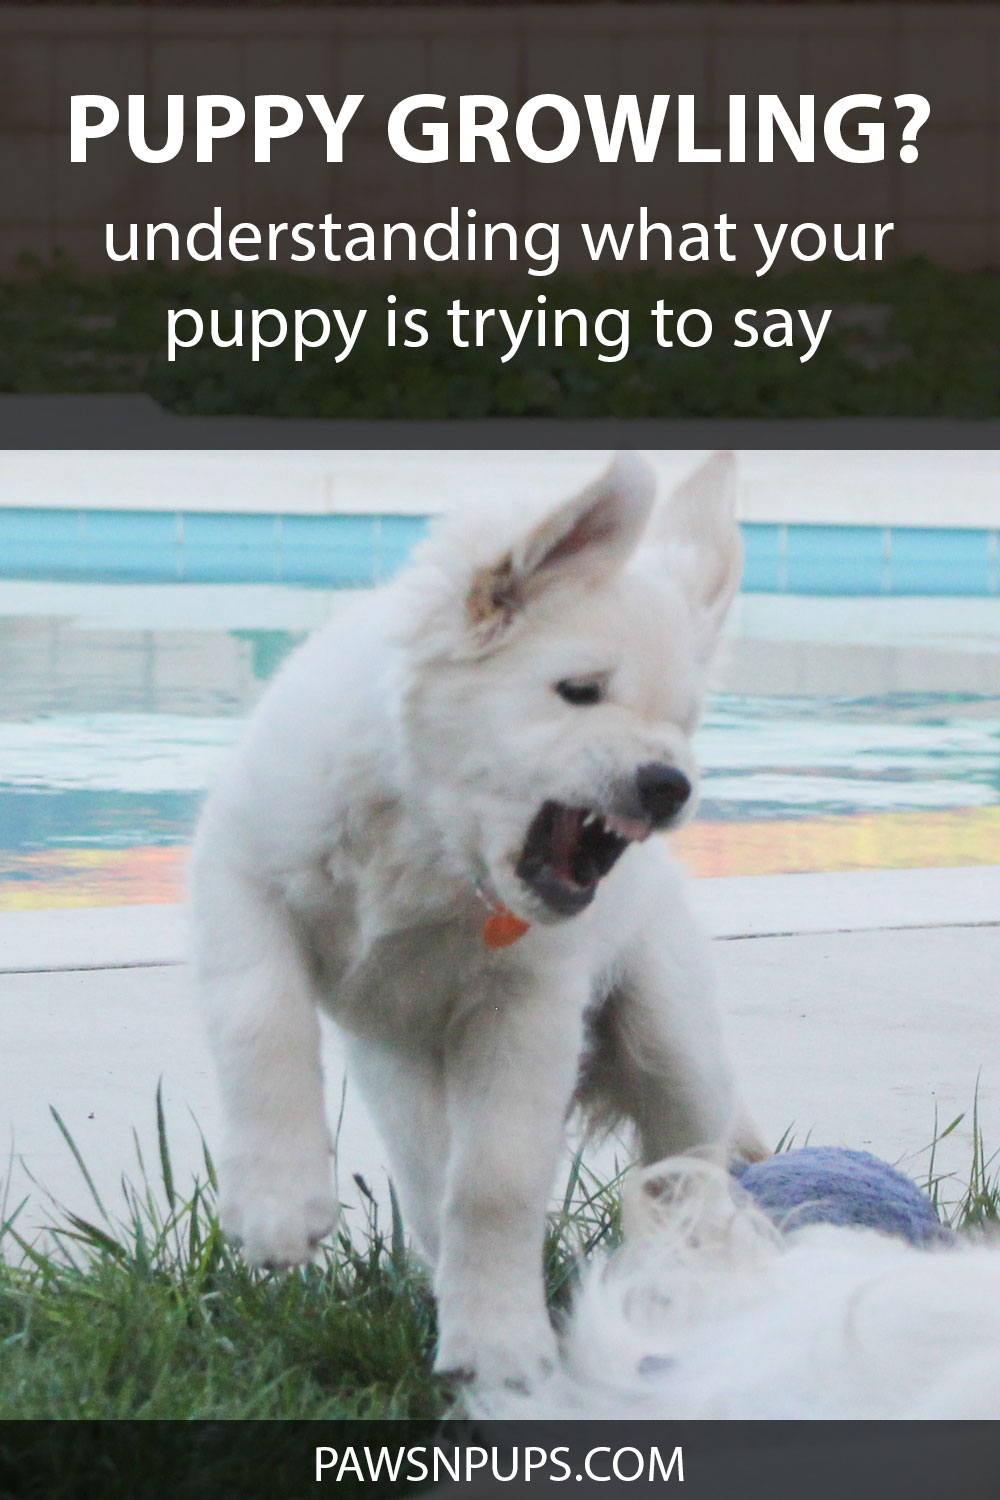 Puppy Growling? - Understanding What Your Puppy Is Trying To Say - Golden Retriever puppy jumping growling with a swimming pool in the background.